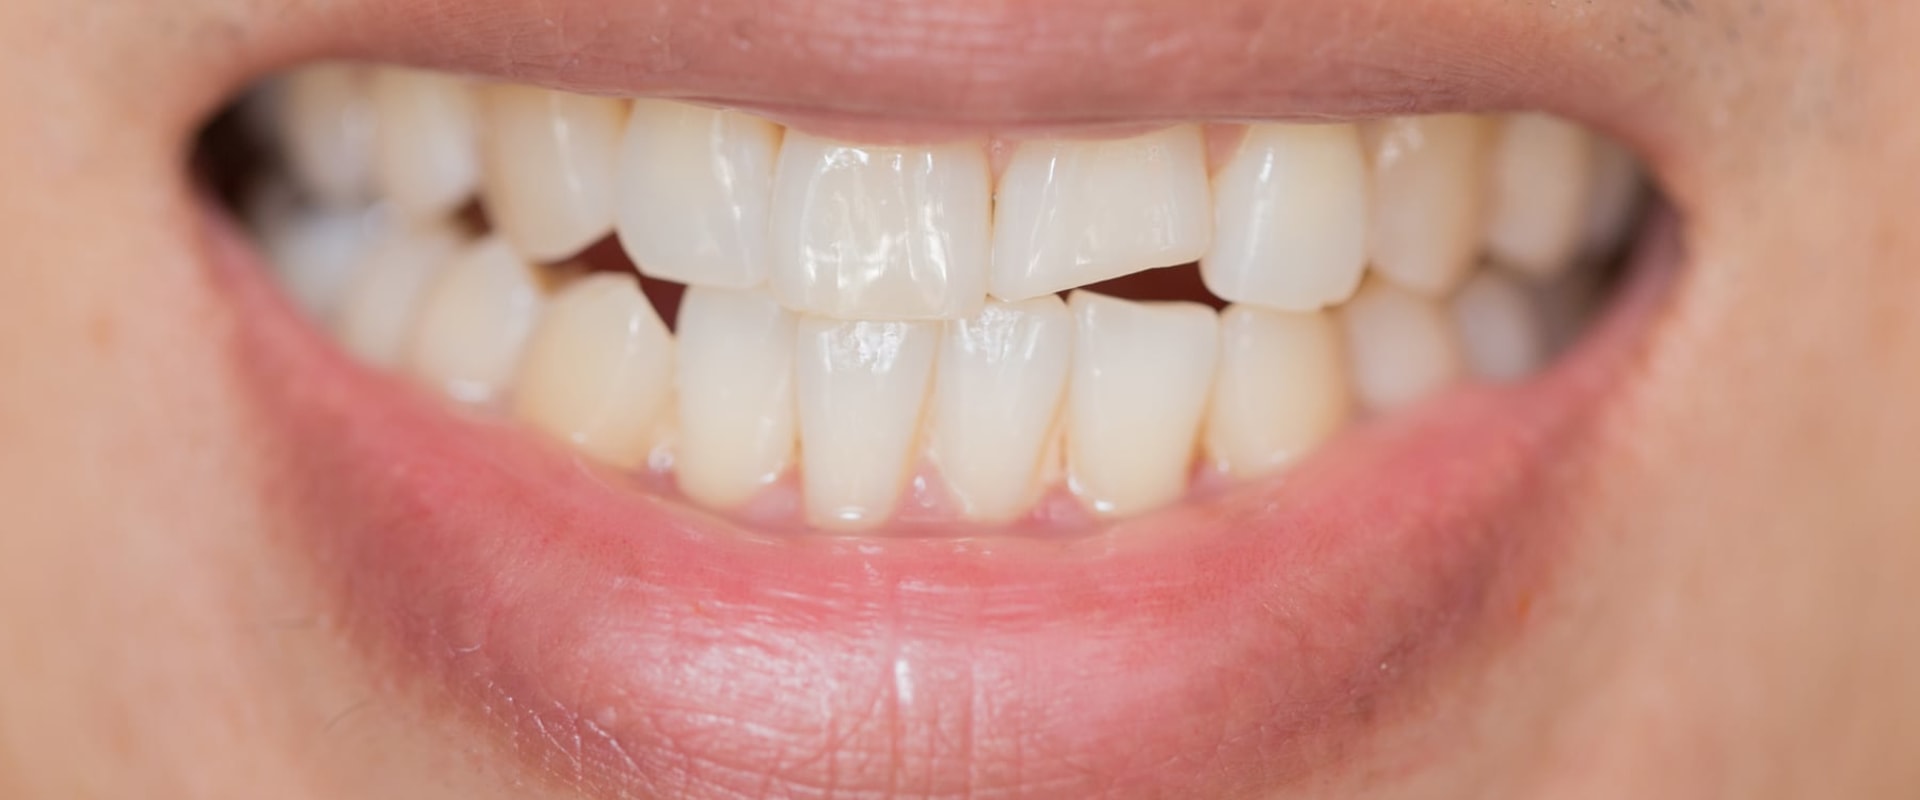 Does a Chipped Tooth Require Immediate Attention?